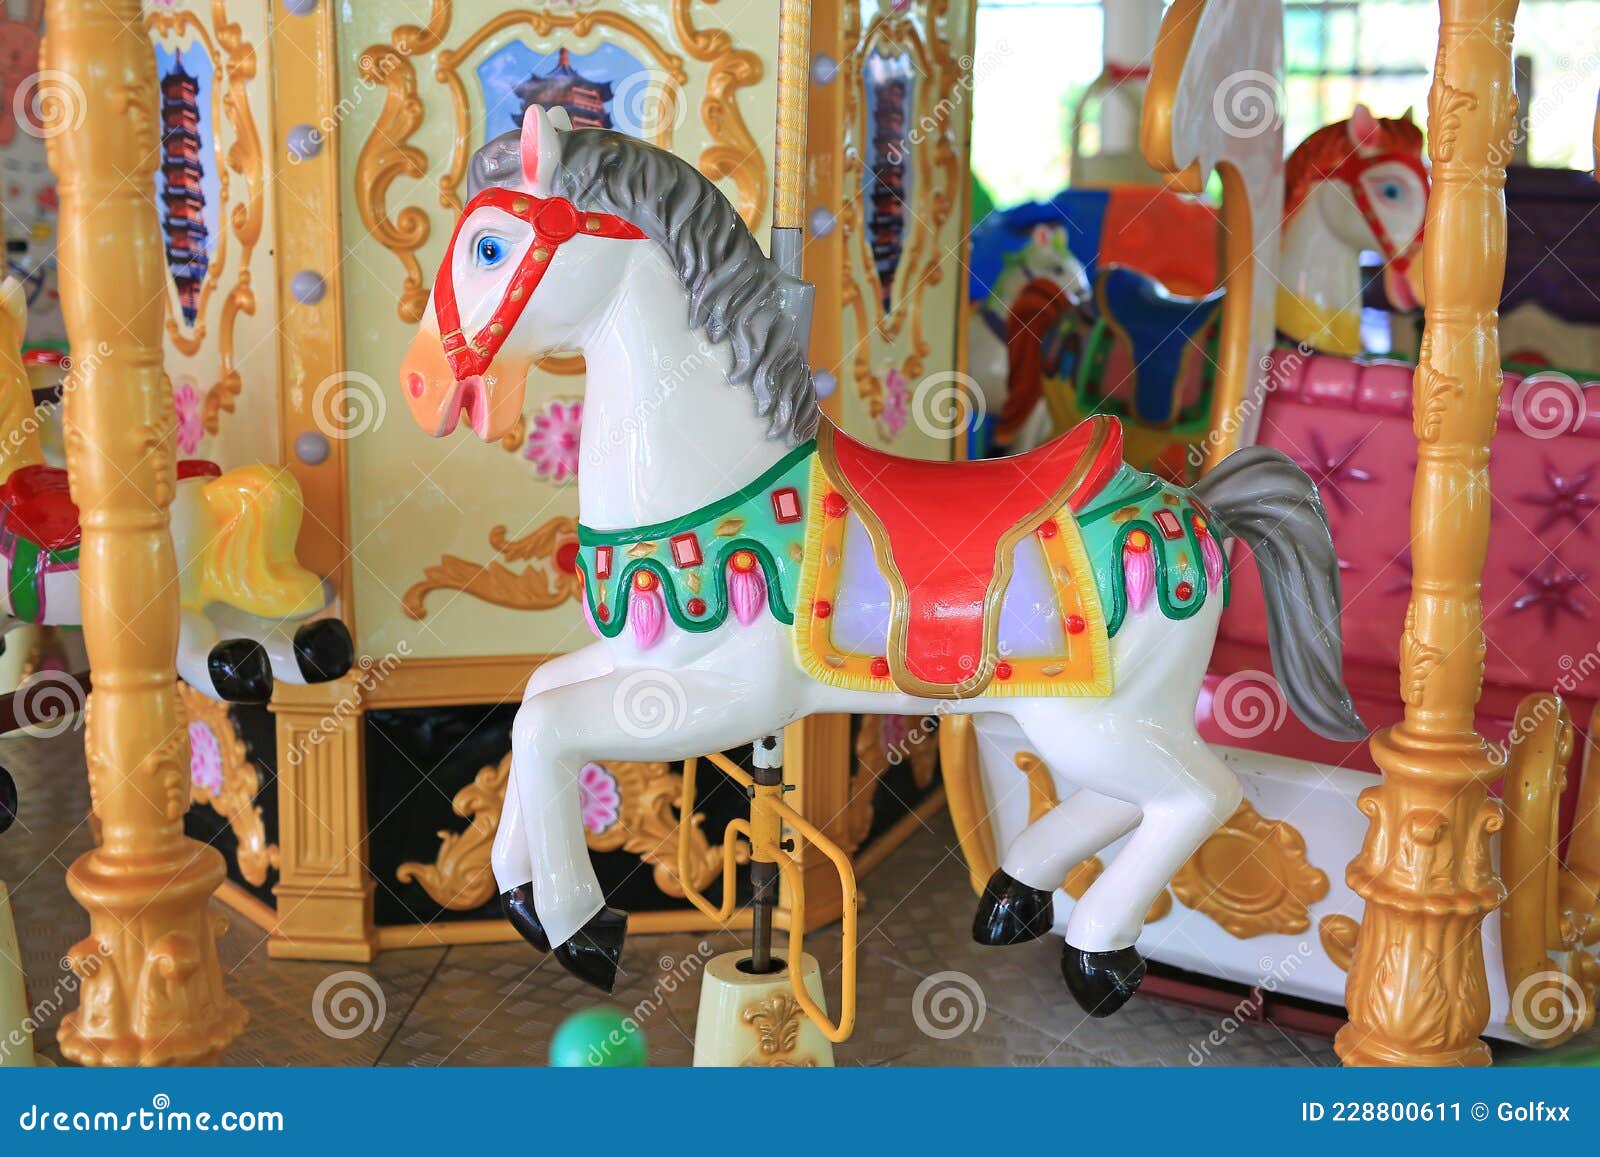 Horses On A Carnival Merry Go Round Stock Image Image Of Multi Play